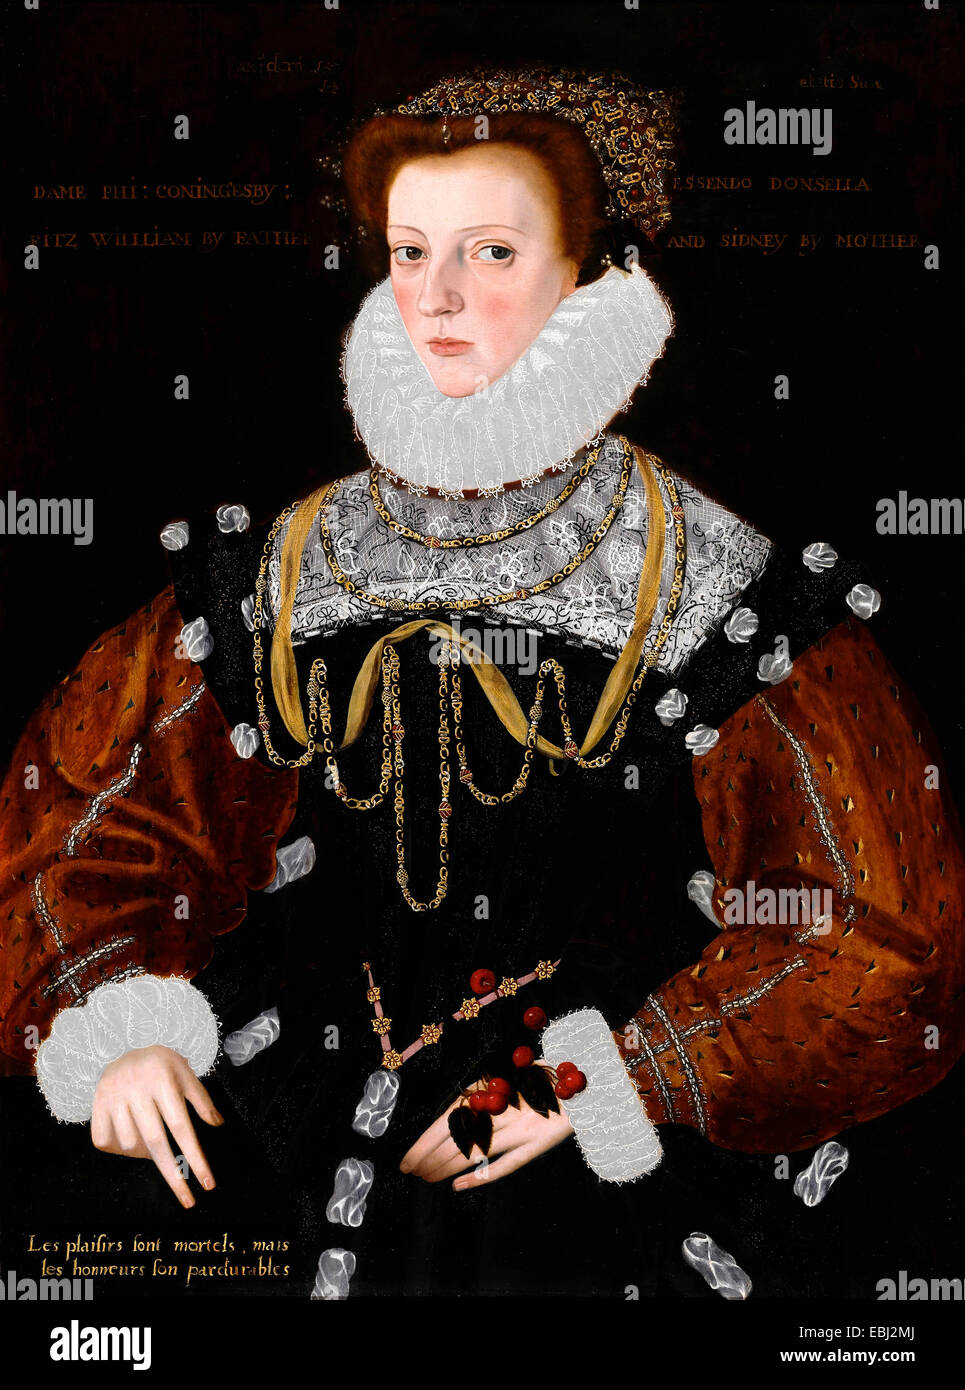 George Gower, Lady Philippa Coningsby 1578 Öl auf Holz. Indianapolis Museum of Art, USA. Stockfoto